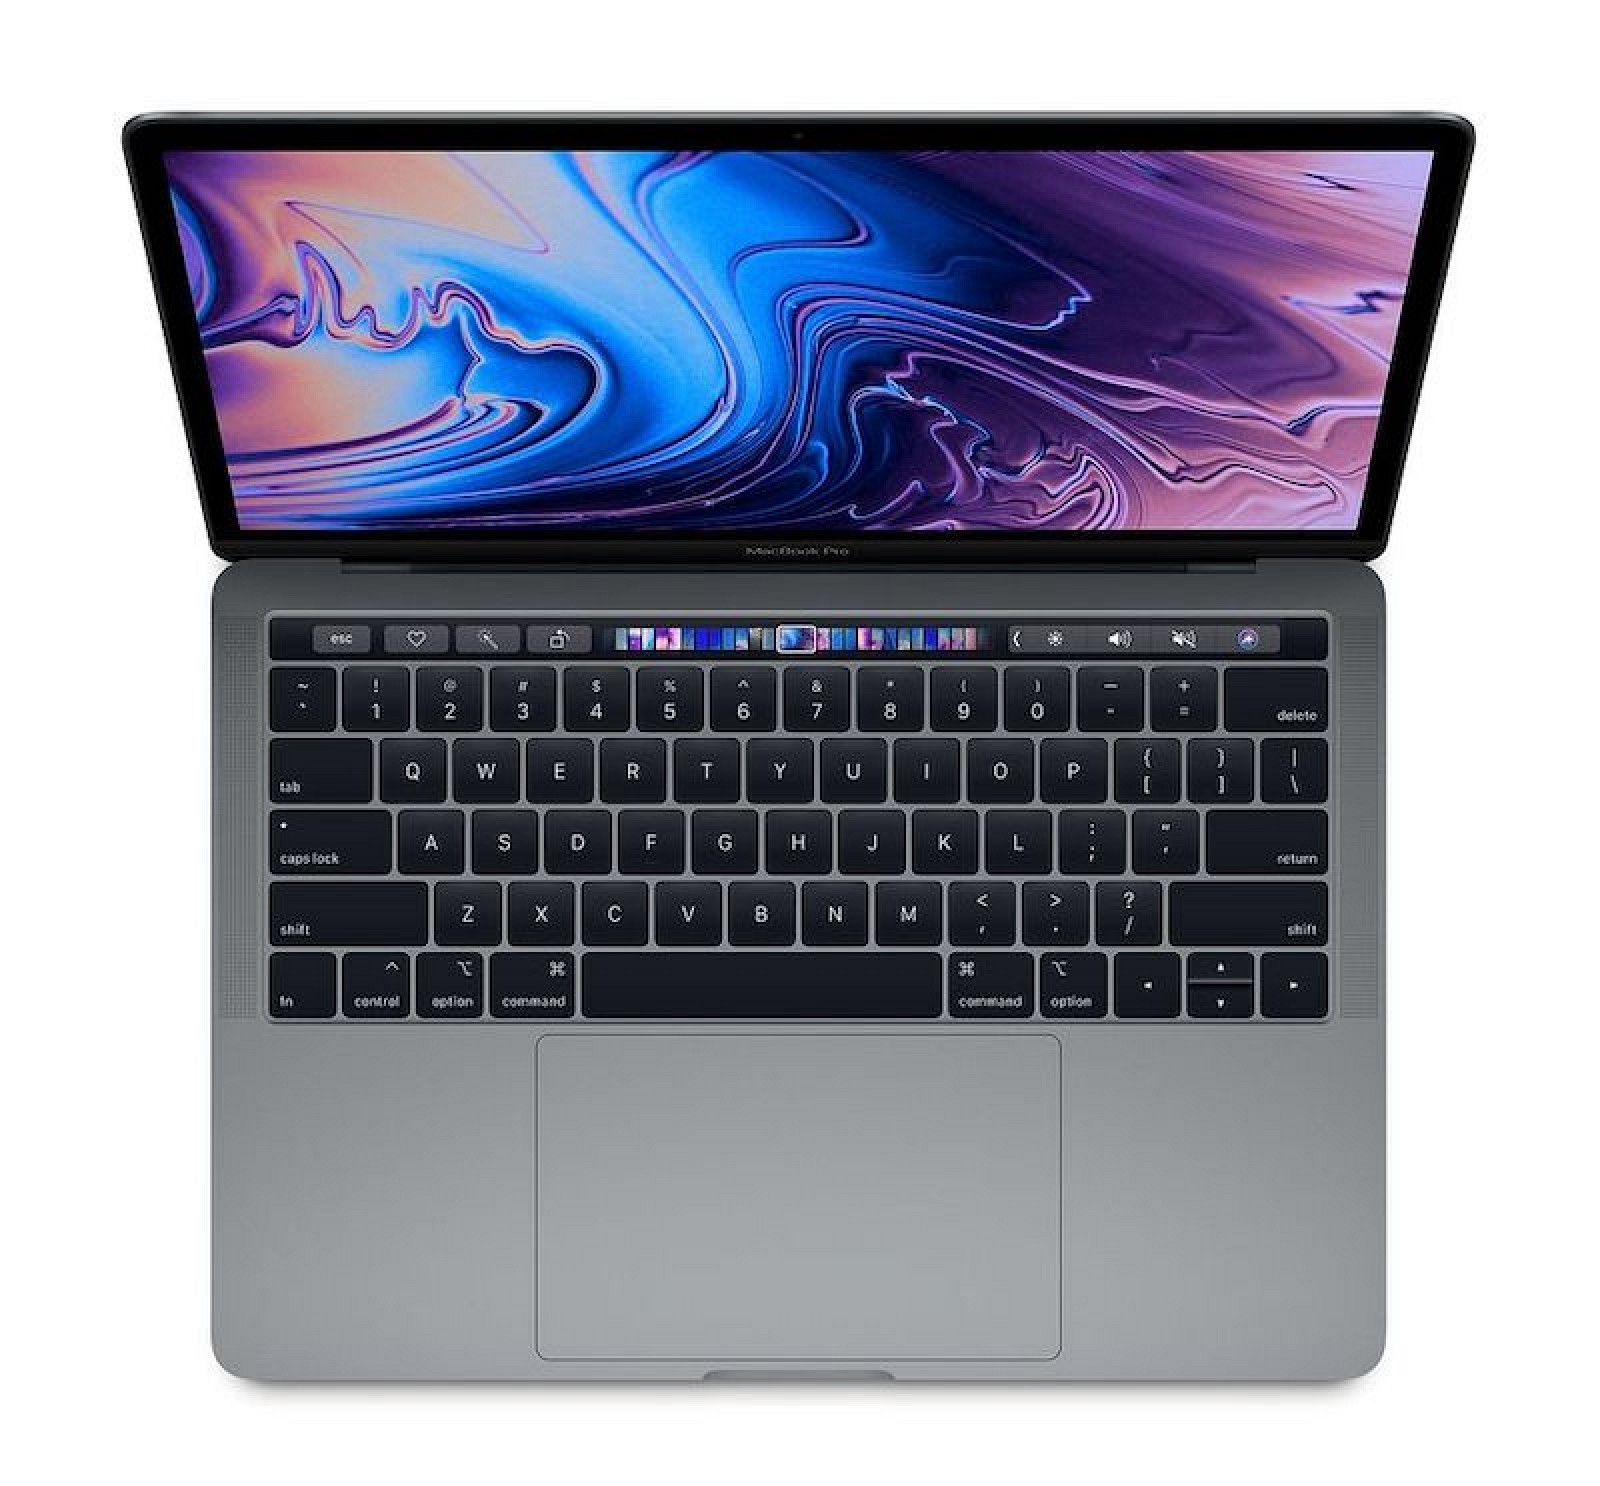 Base 2019 13-Inch MacBook Pro is Up to 83% Faster Than Previous Generation in Benchmarks